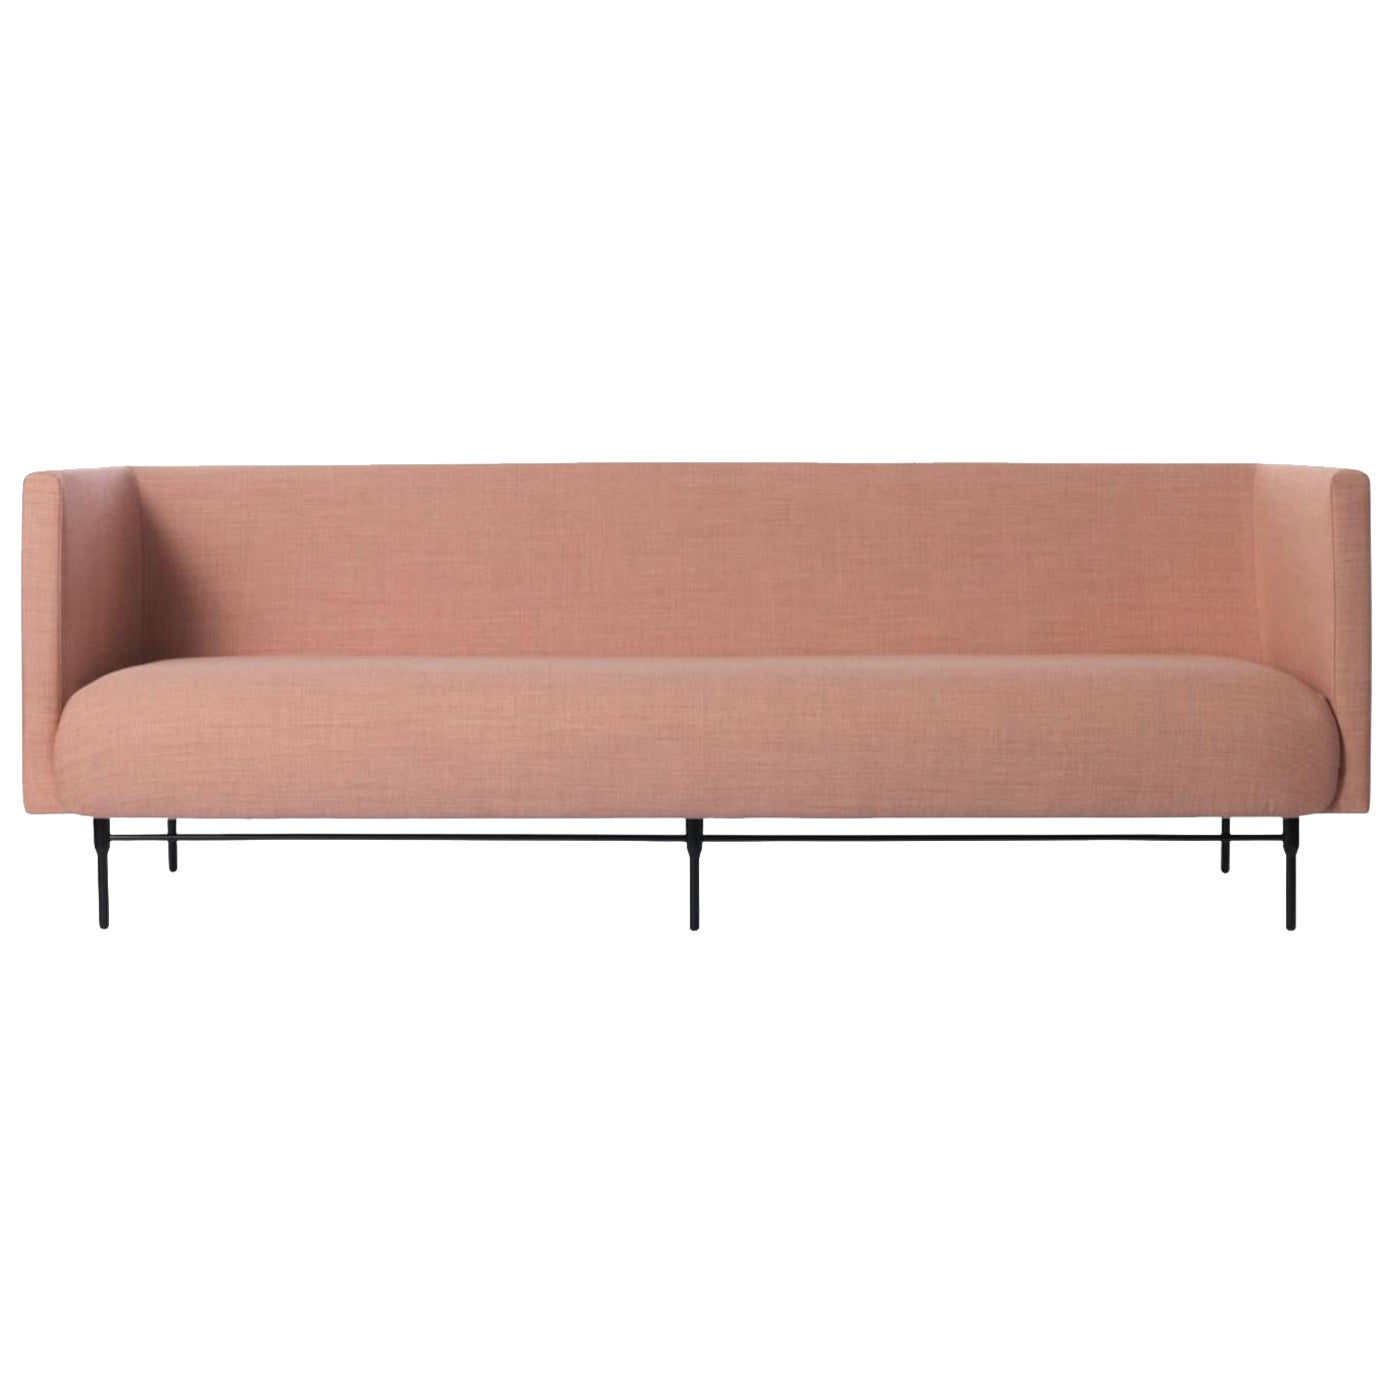 Galore 3 Seater Pale Rose by Warm Nordic